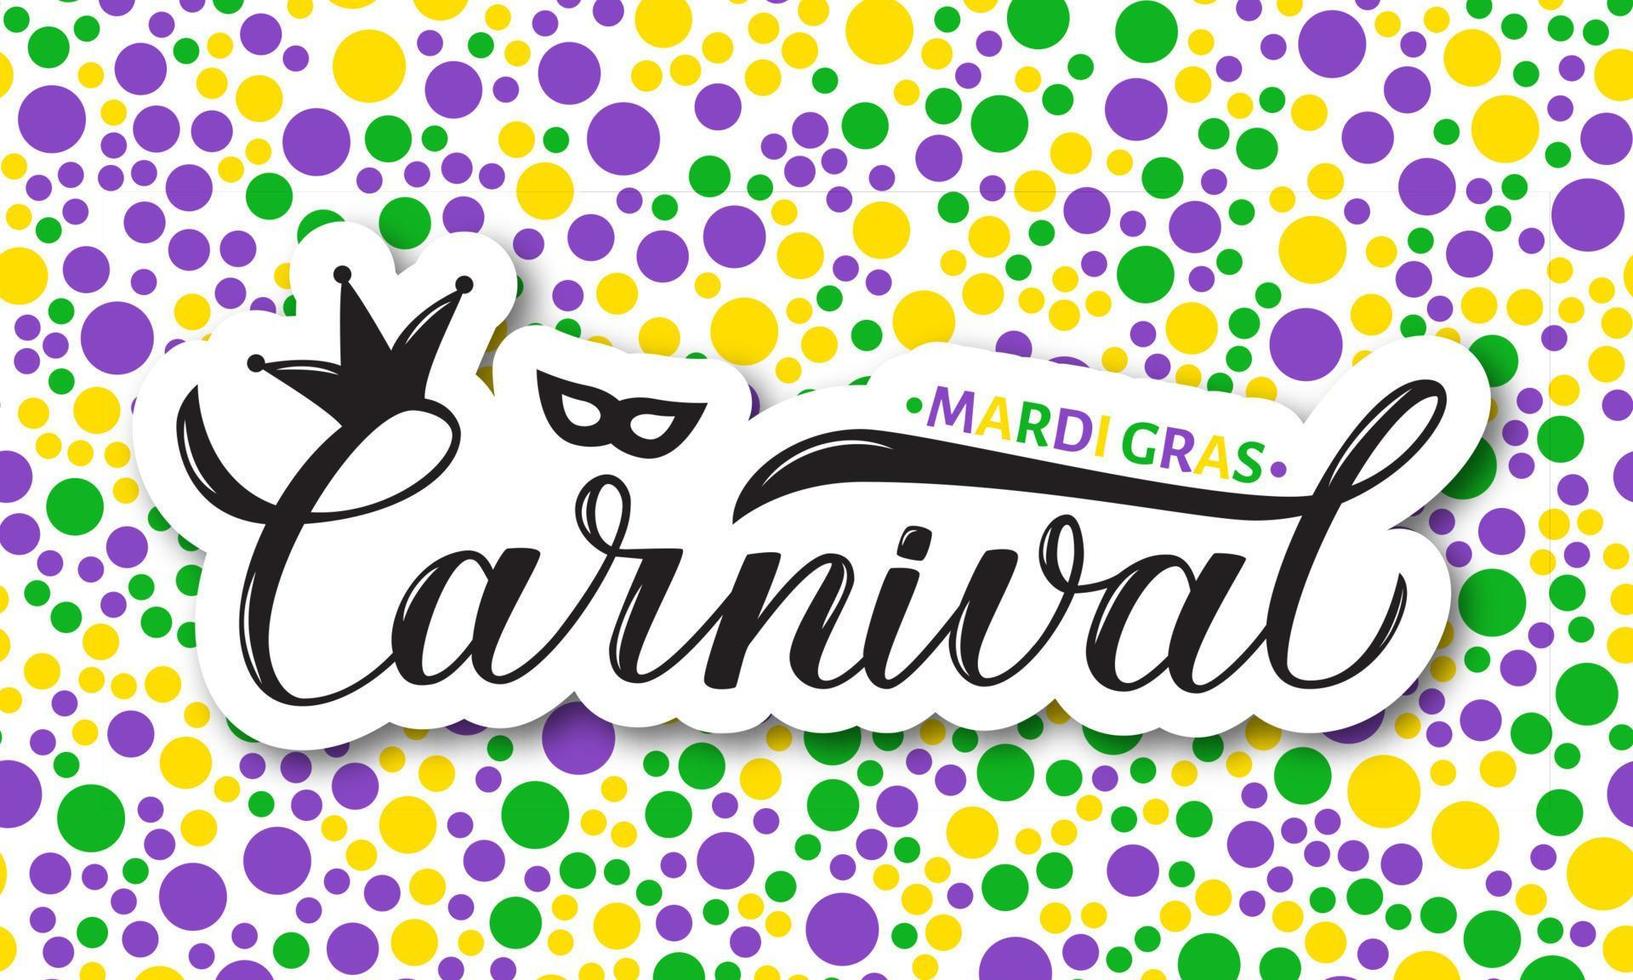 Carnival Mardi Gras calligraphy hand lettering on colorful confetti background. New Orleans Masquerade party invitation or banner. Fat or Shrove Tuesday sign. Vector illustration.